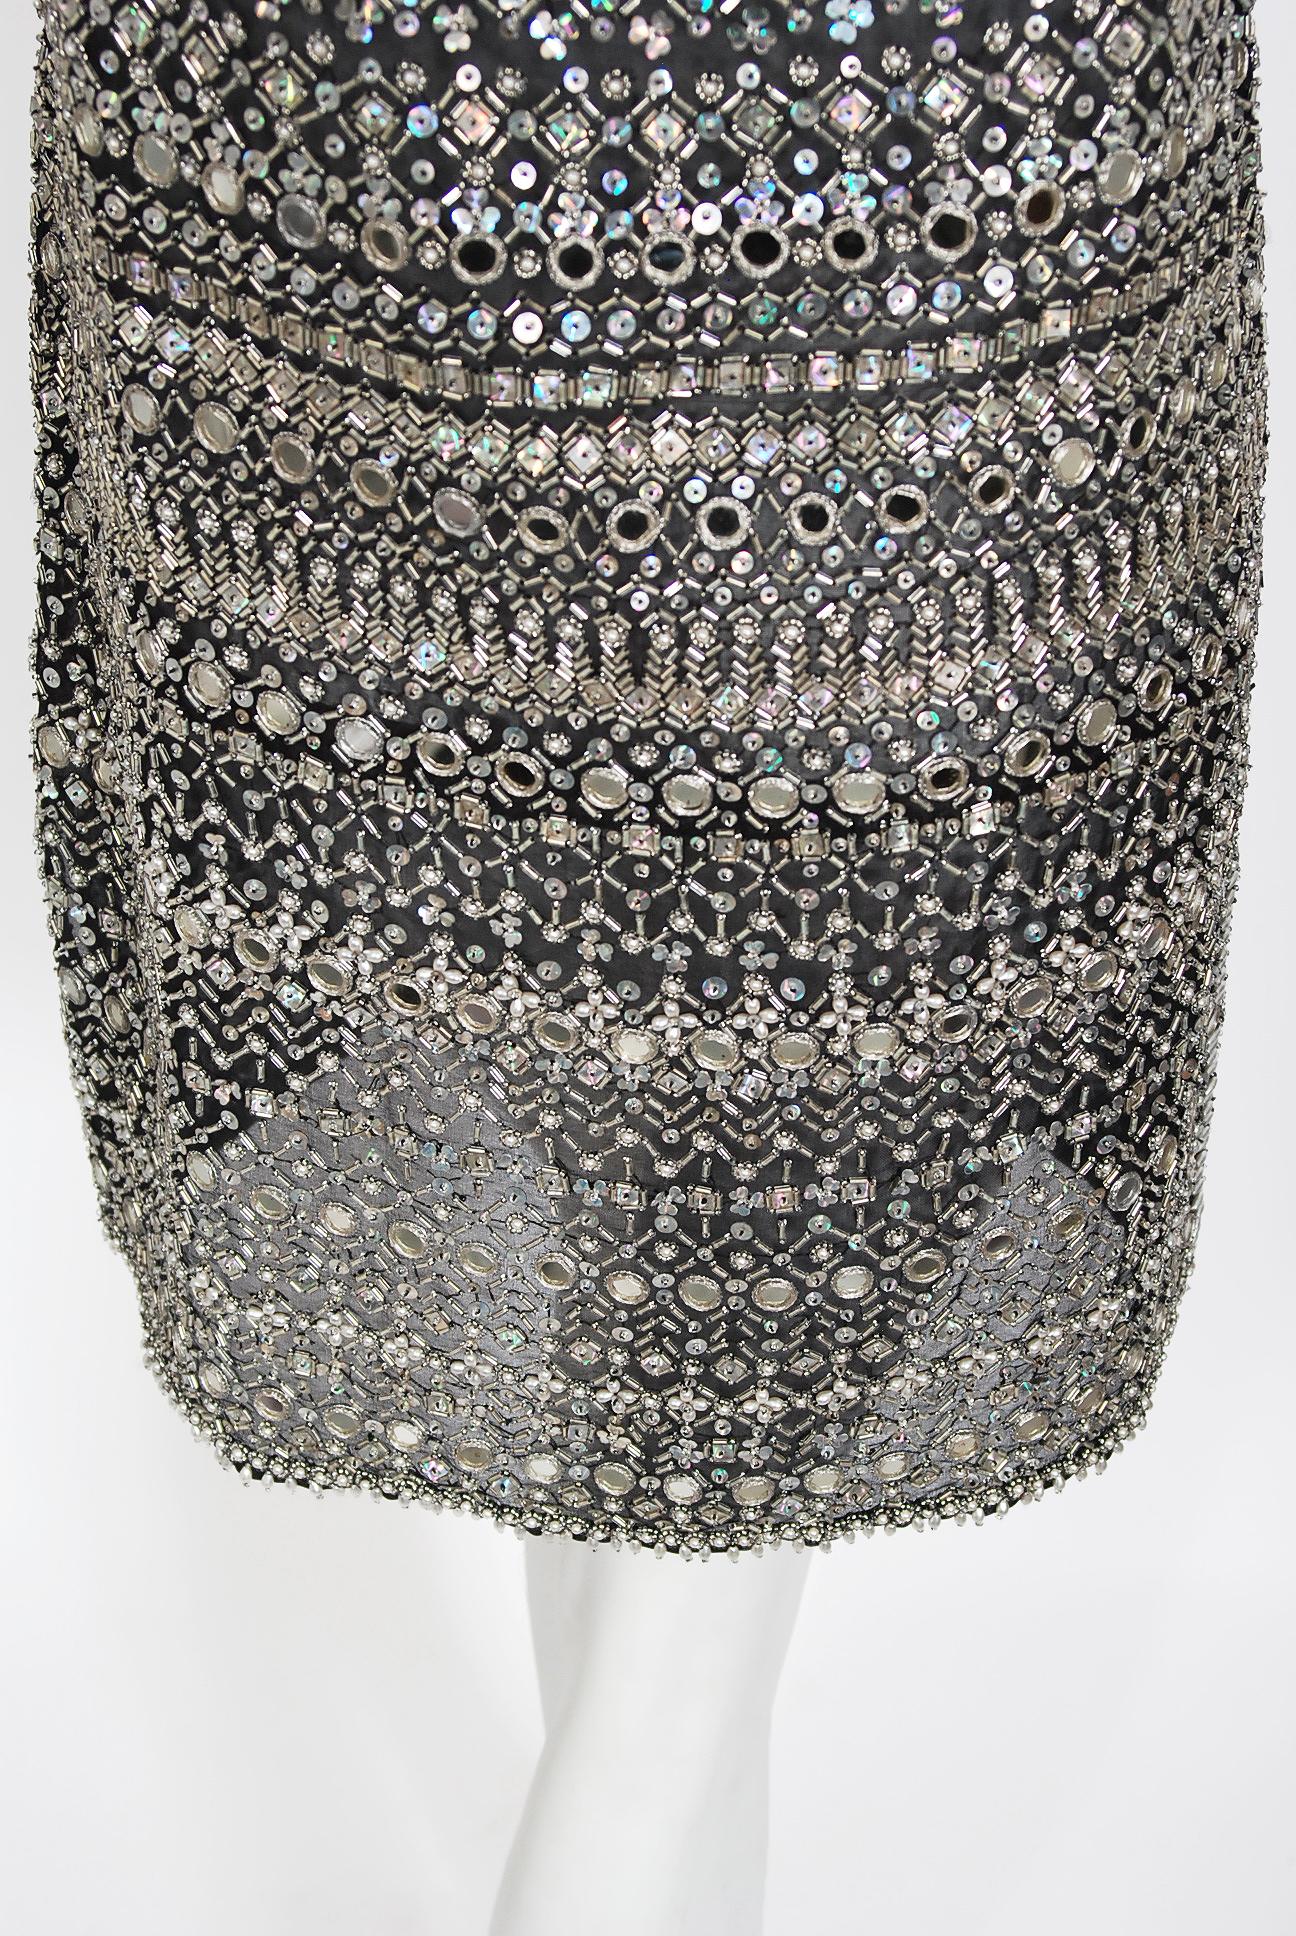 Vintage Halston Couture Beaded Mirror Mini Dress & Jacket Made For Liza Minnelli 10